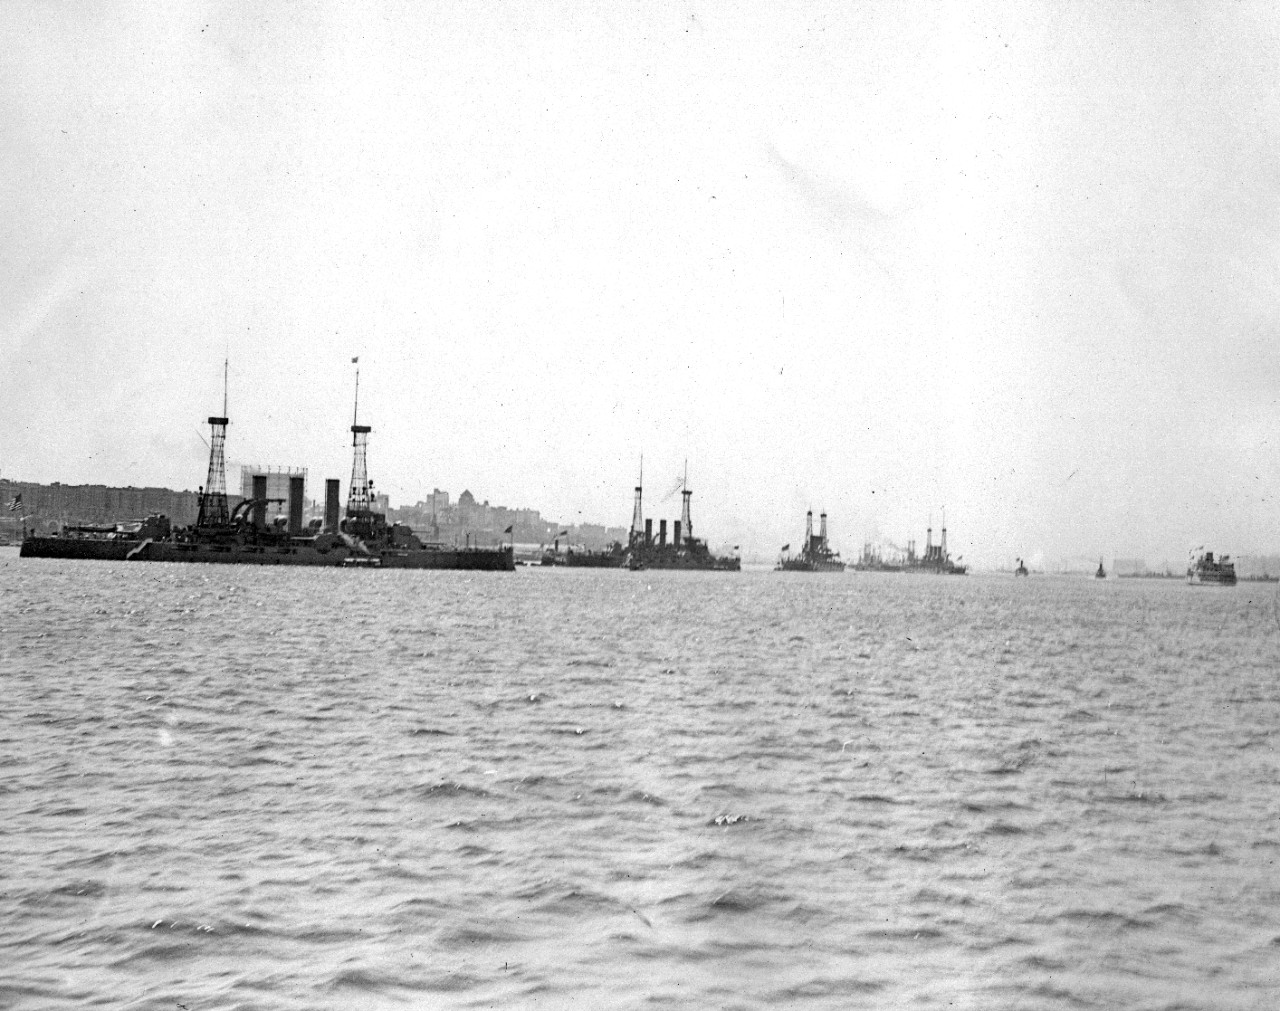 9 glass plate negatives donated by Carl S. Meyer. Shown are US Navy battleships a destroyer, and an admiral’s launch at the 1915 Fleet Review in New York Harbor. Ships seen include USS New Hampshire (BB-25), USS North Dakota (BB-29), USS New York (BB-34) or USS Texas (BB-35), and USS Arkansas (BB-33) or USS Wyoming (BB-32). Copy prints included.